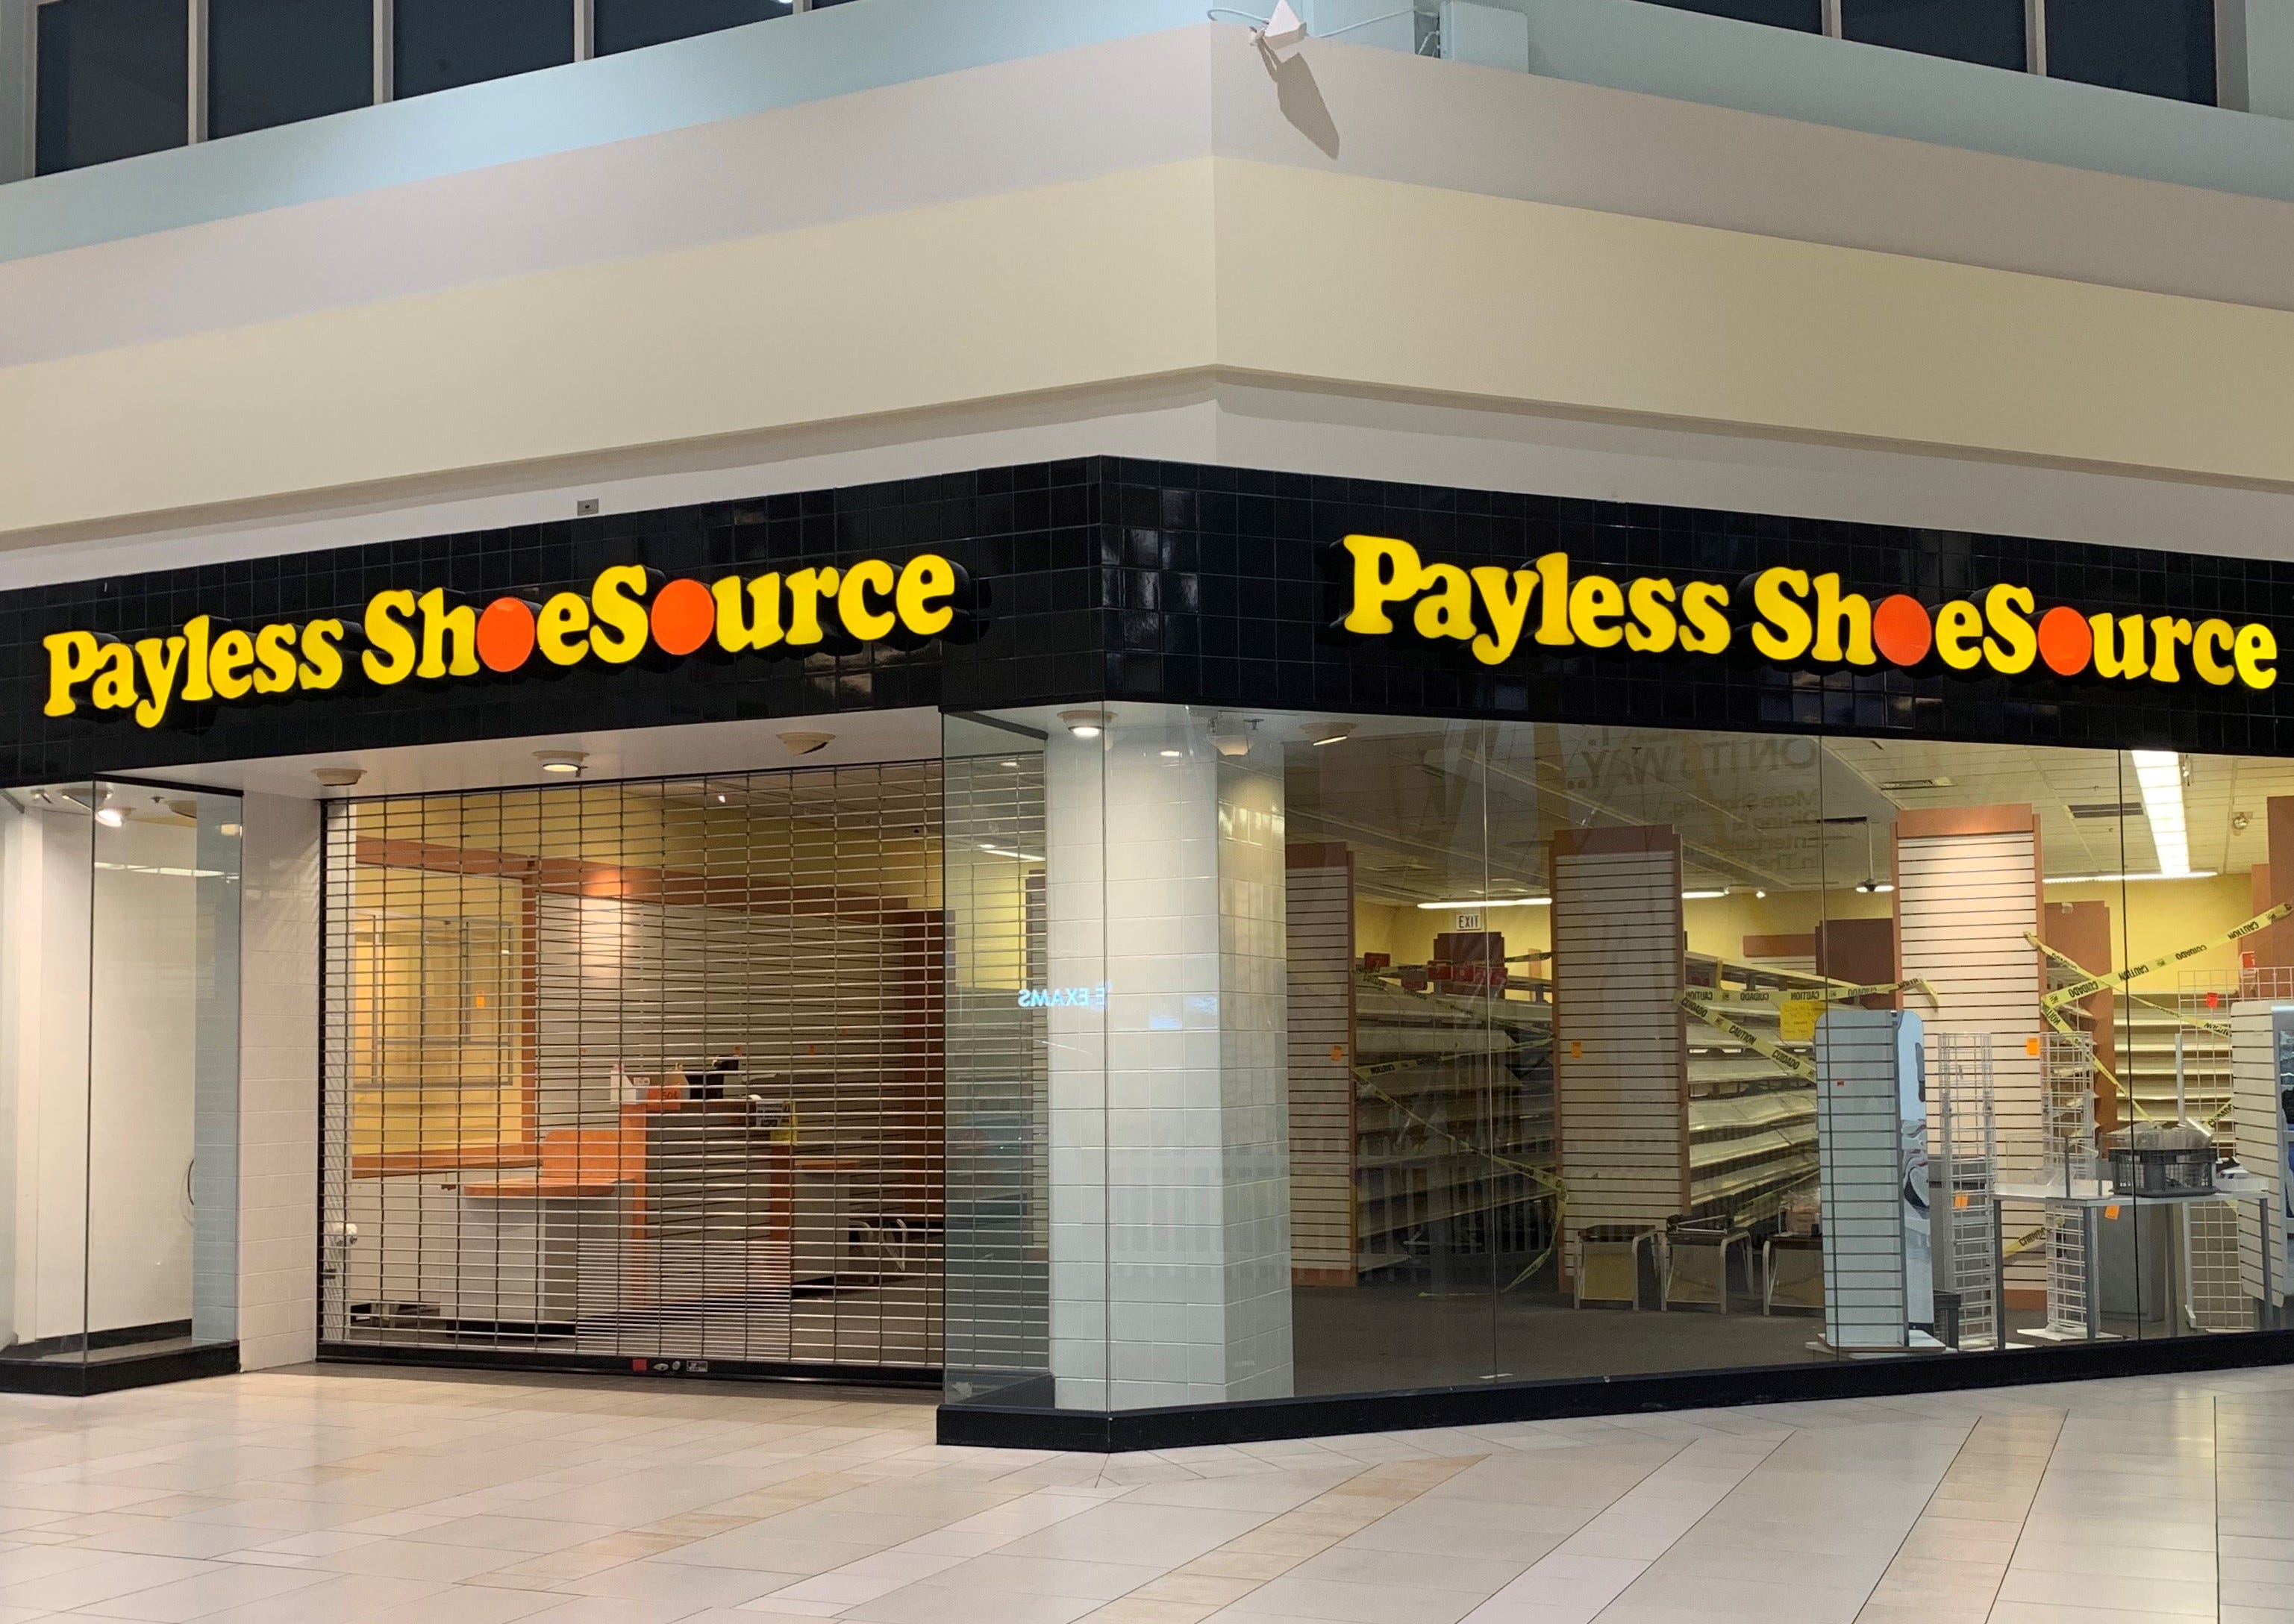 payless shoes in the news